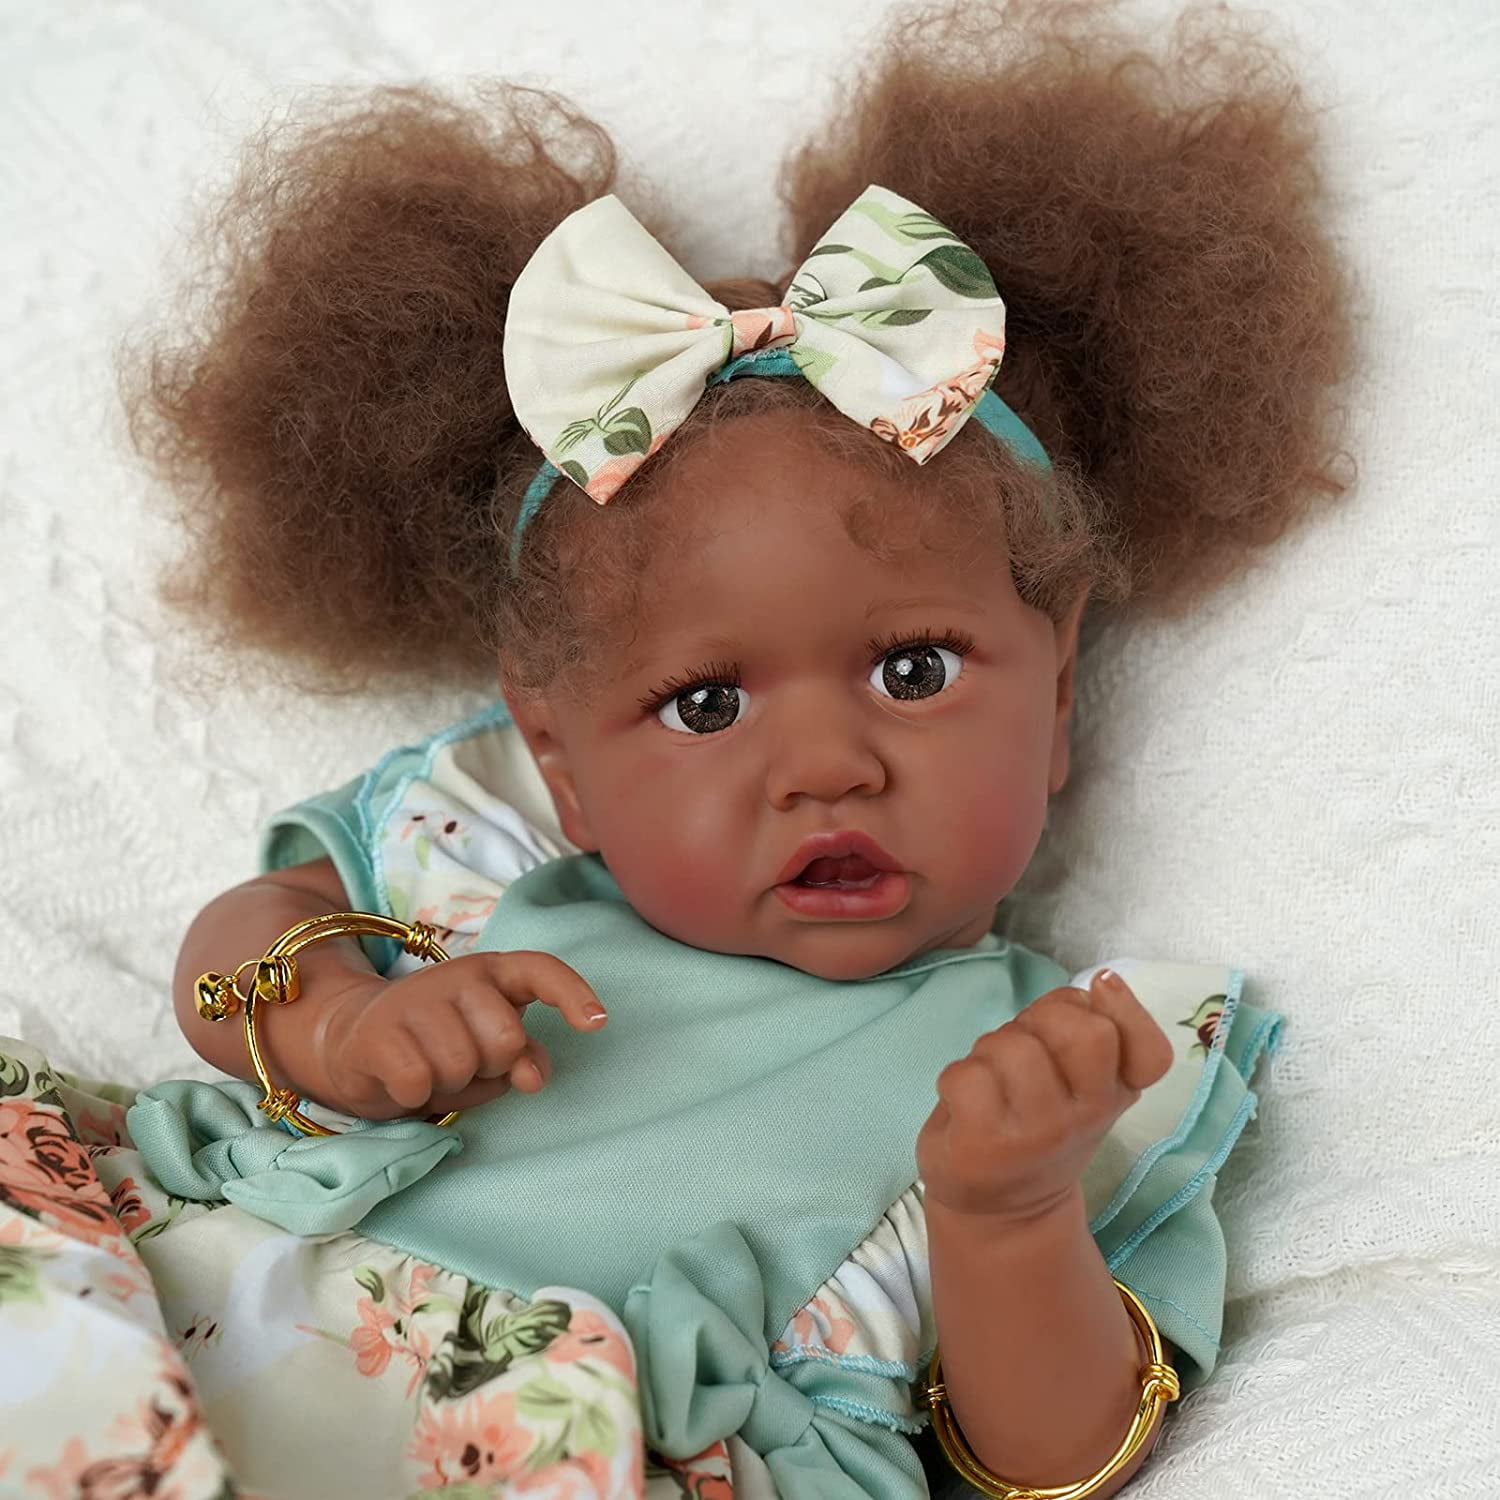 Zero Pam Realistic Reborn Dolls Girls 19 Inch Real Looking Babies Soft  Silicone Baby Dolls That Look Real Looking Newborn Doll Lifelike Reborn  Toddler